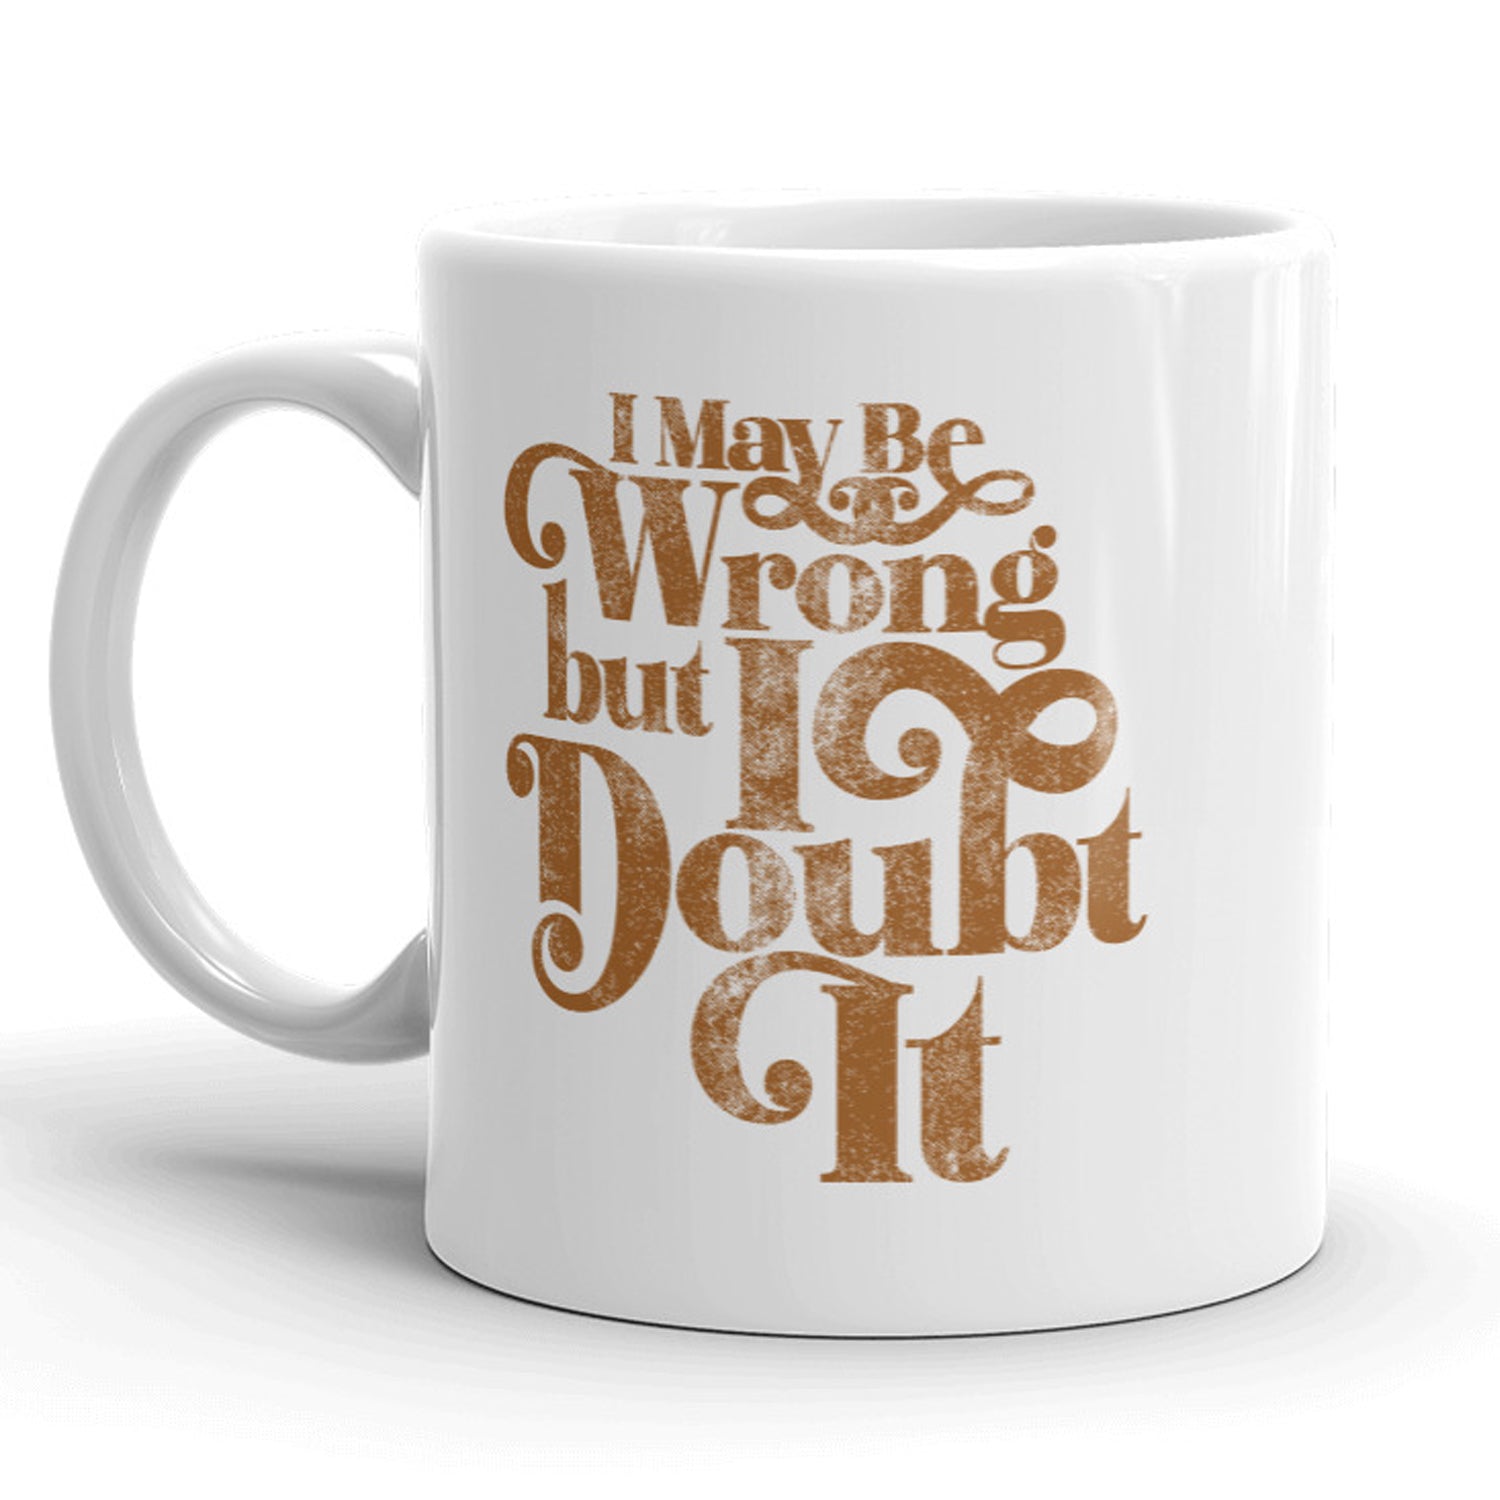 Funny White I May Be Wrong But I Doubt It Coffee Mug Nerdy Sarcastic Tee